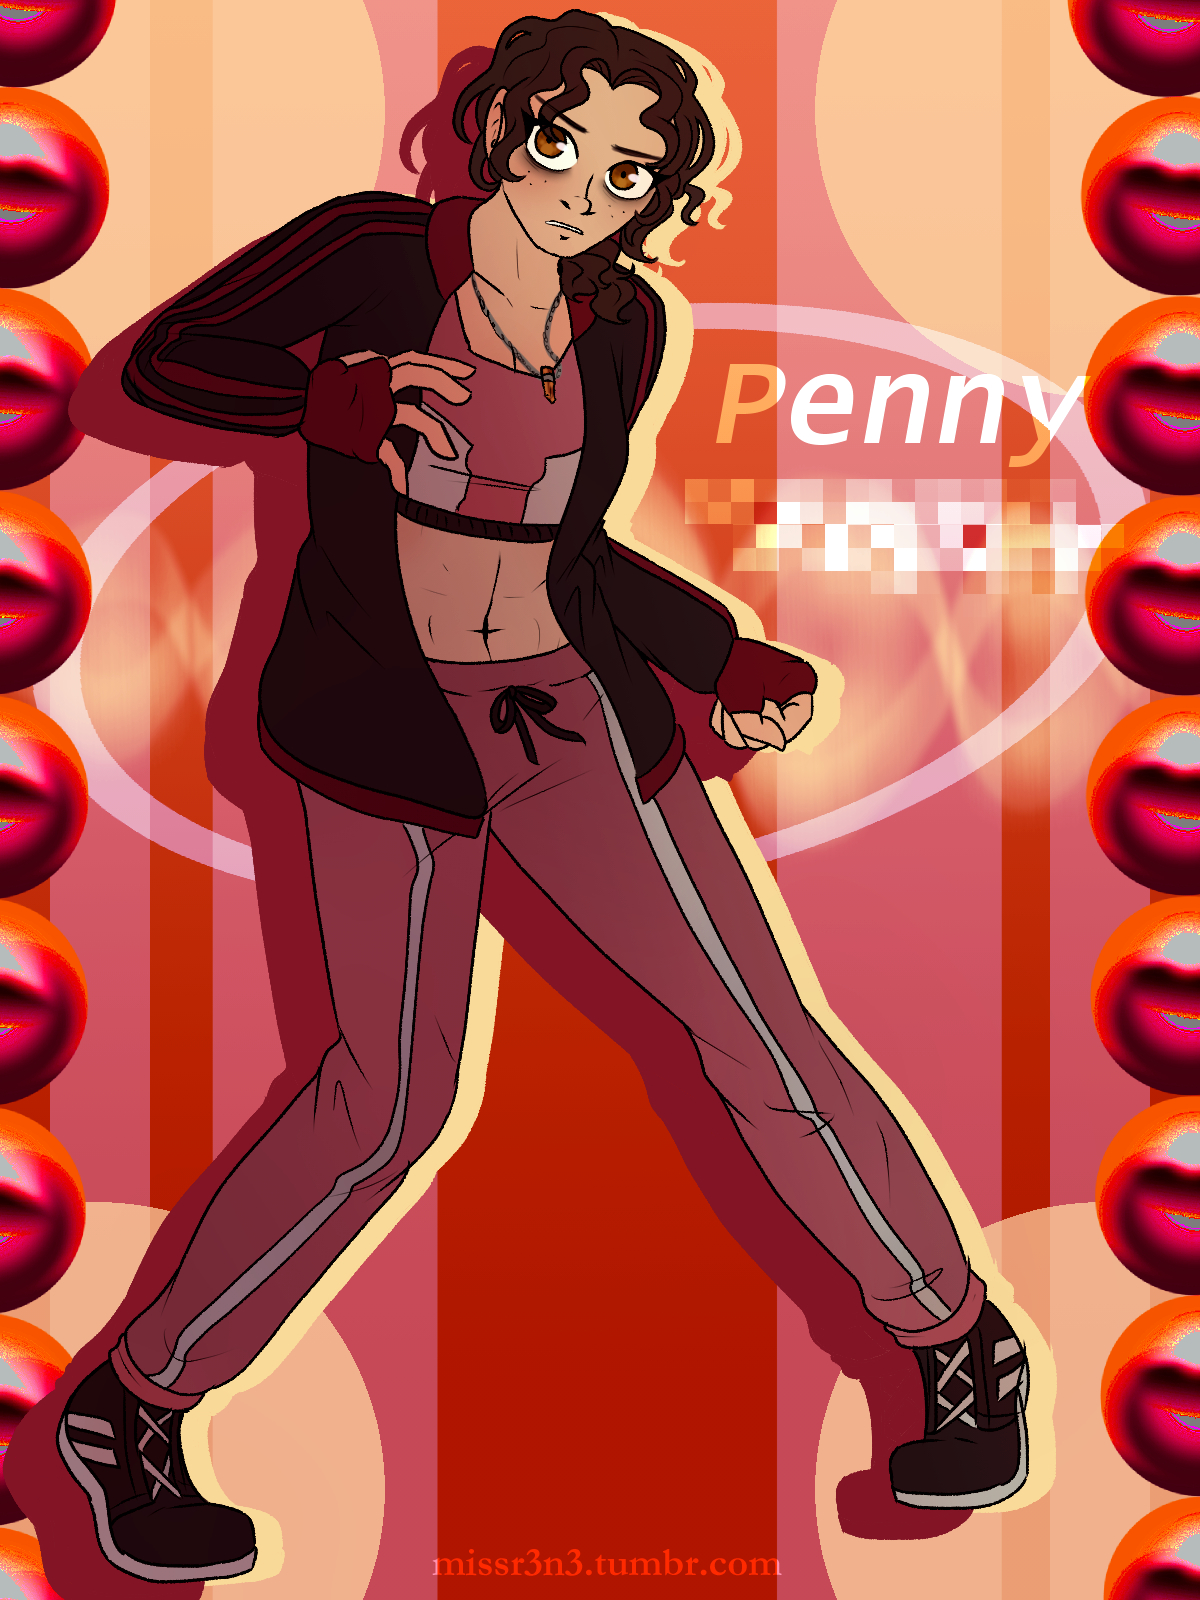 a young athletic woman dressed in a track suit and sports bra in front of a red and orange, y2k style background. test beside her reads 'Penny' and what appears to be her last name is glitched out and unreadable